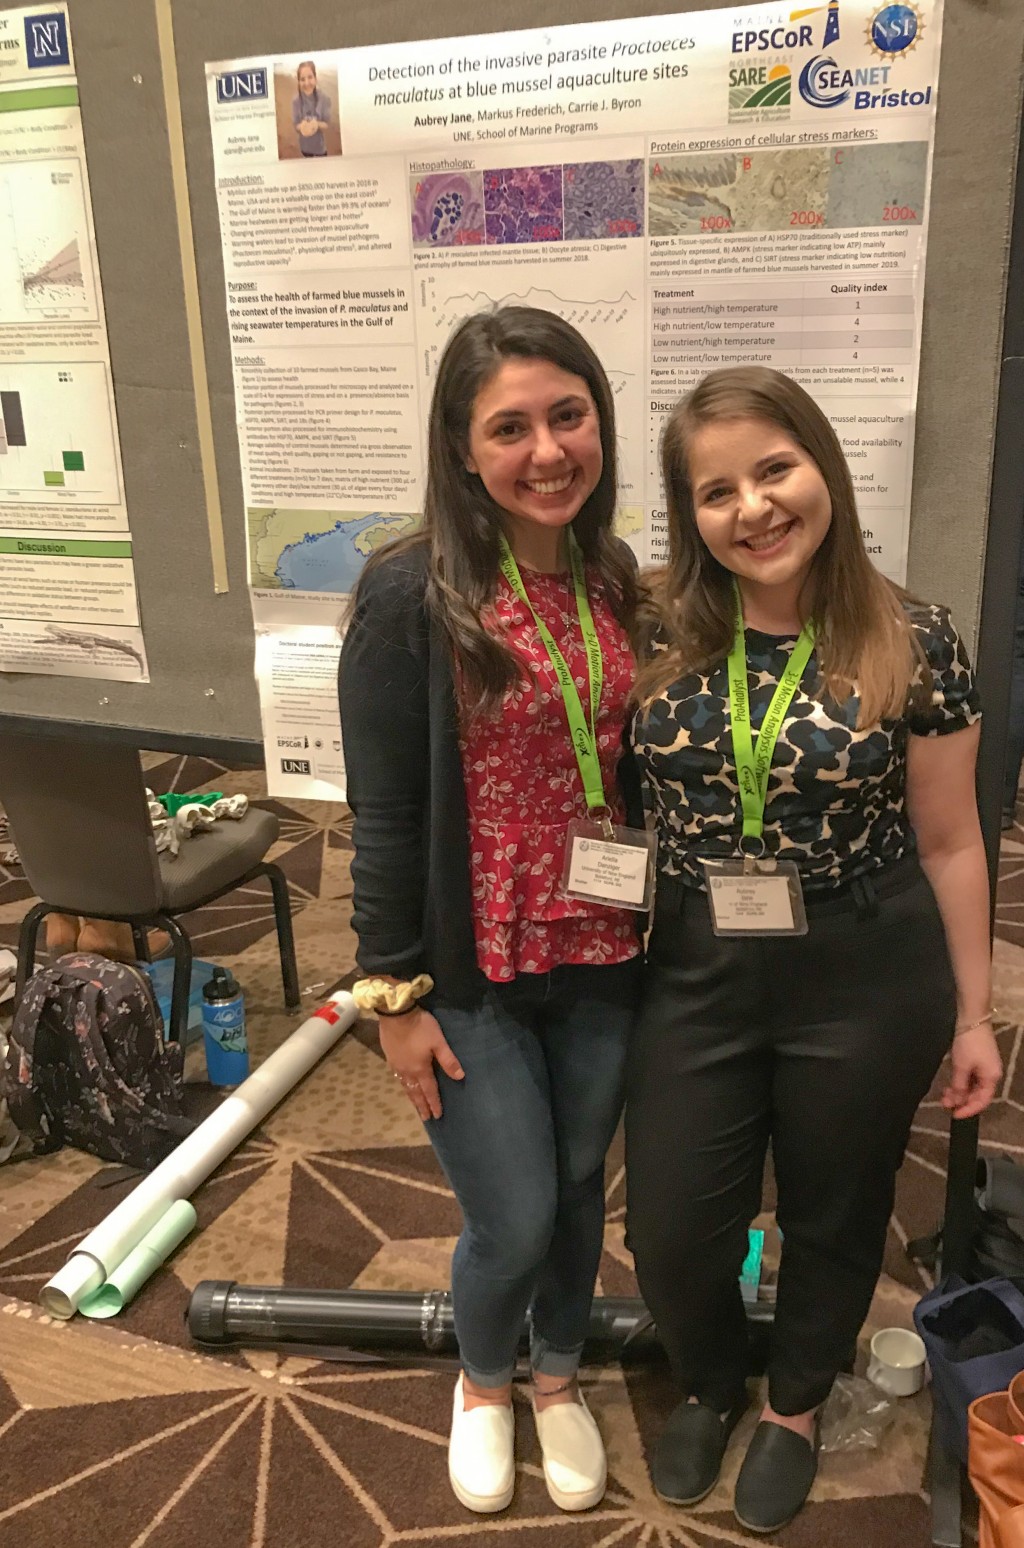 Students Danzinger and Jane at the annual meeting of the Society for Integrative and Comparative Biology 